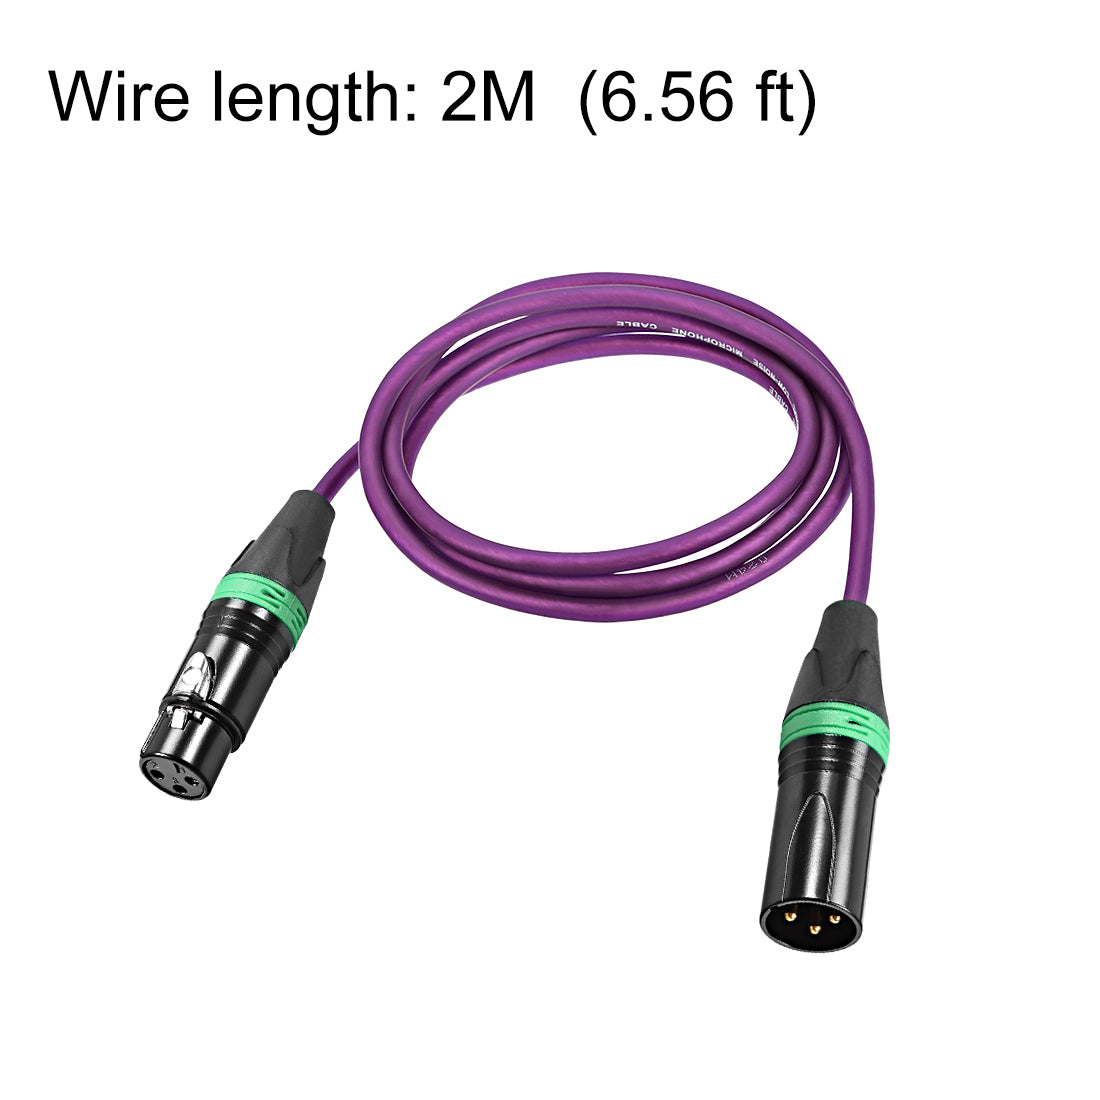 uxcell Uxcell XLR Male to XLR Female Cable Line for Microphone Video Camera Sound Card Mixer Green Black XLR Purple Line 2M  6.56ft